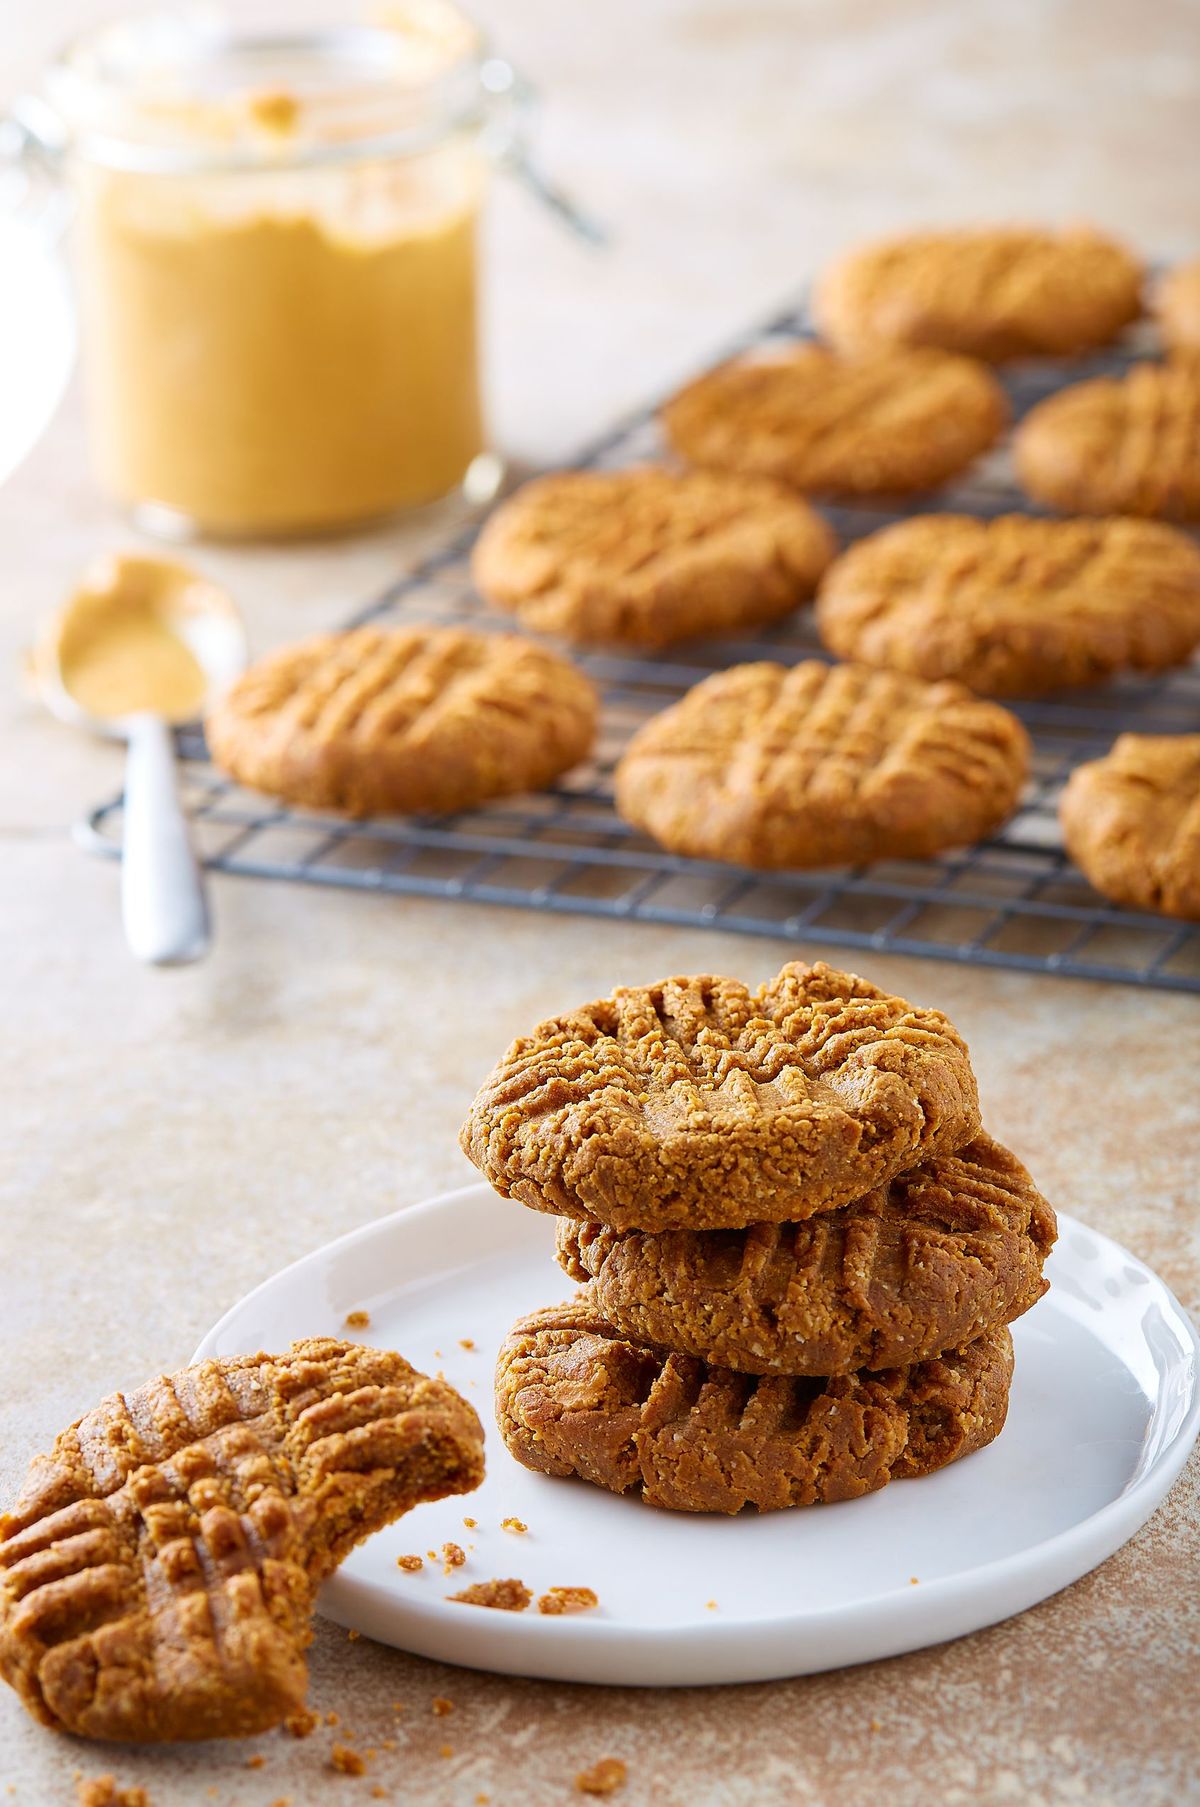 kevin-curry-peanut-butter-cookies.jpg